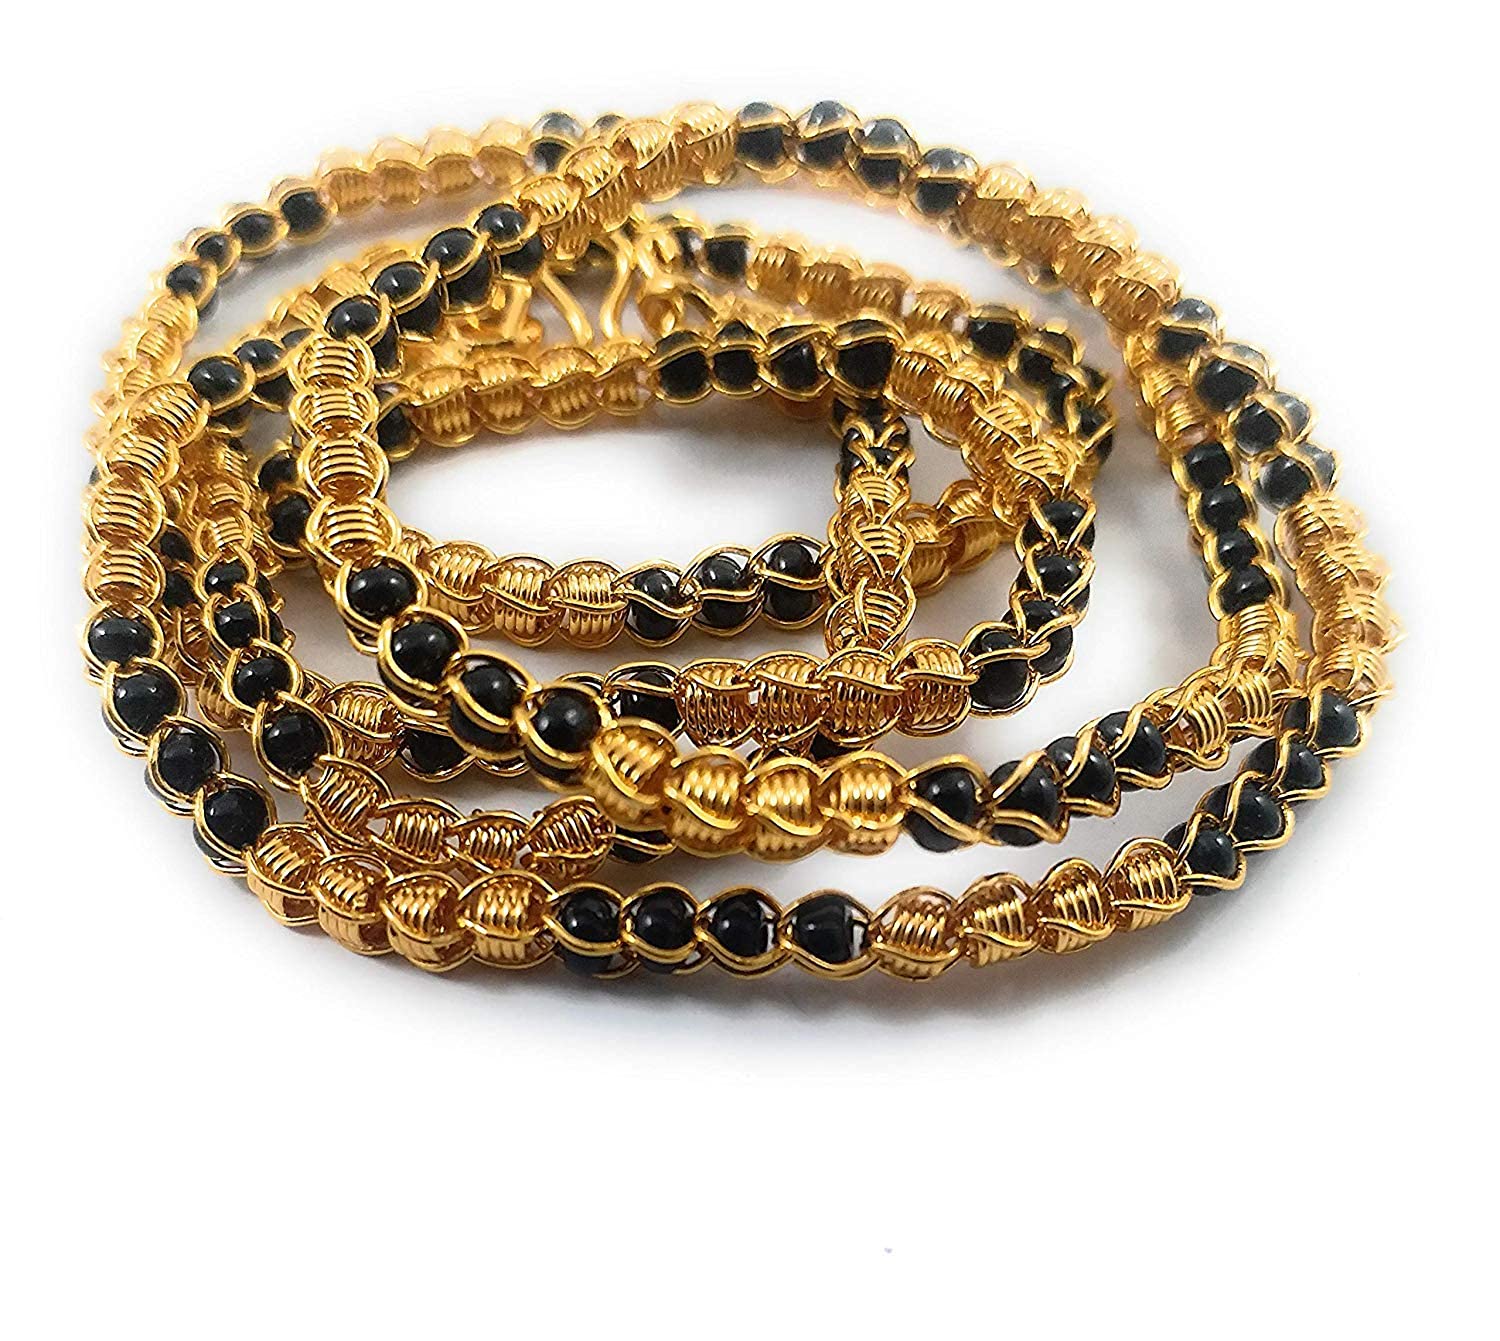 image for South Indian Style Long Mangalsutra Designs Gold Plated Spiral Chain Black Beads Pattern (28 Inches)